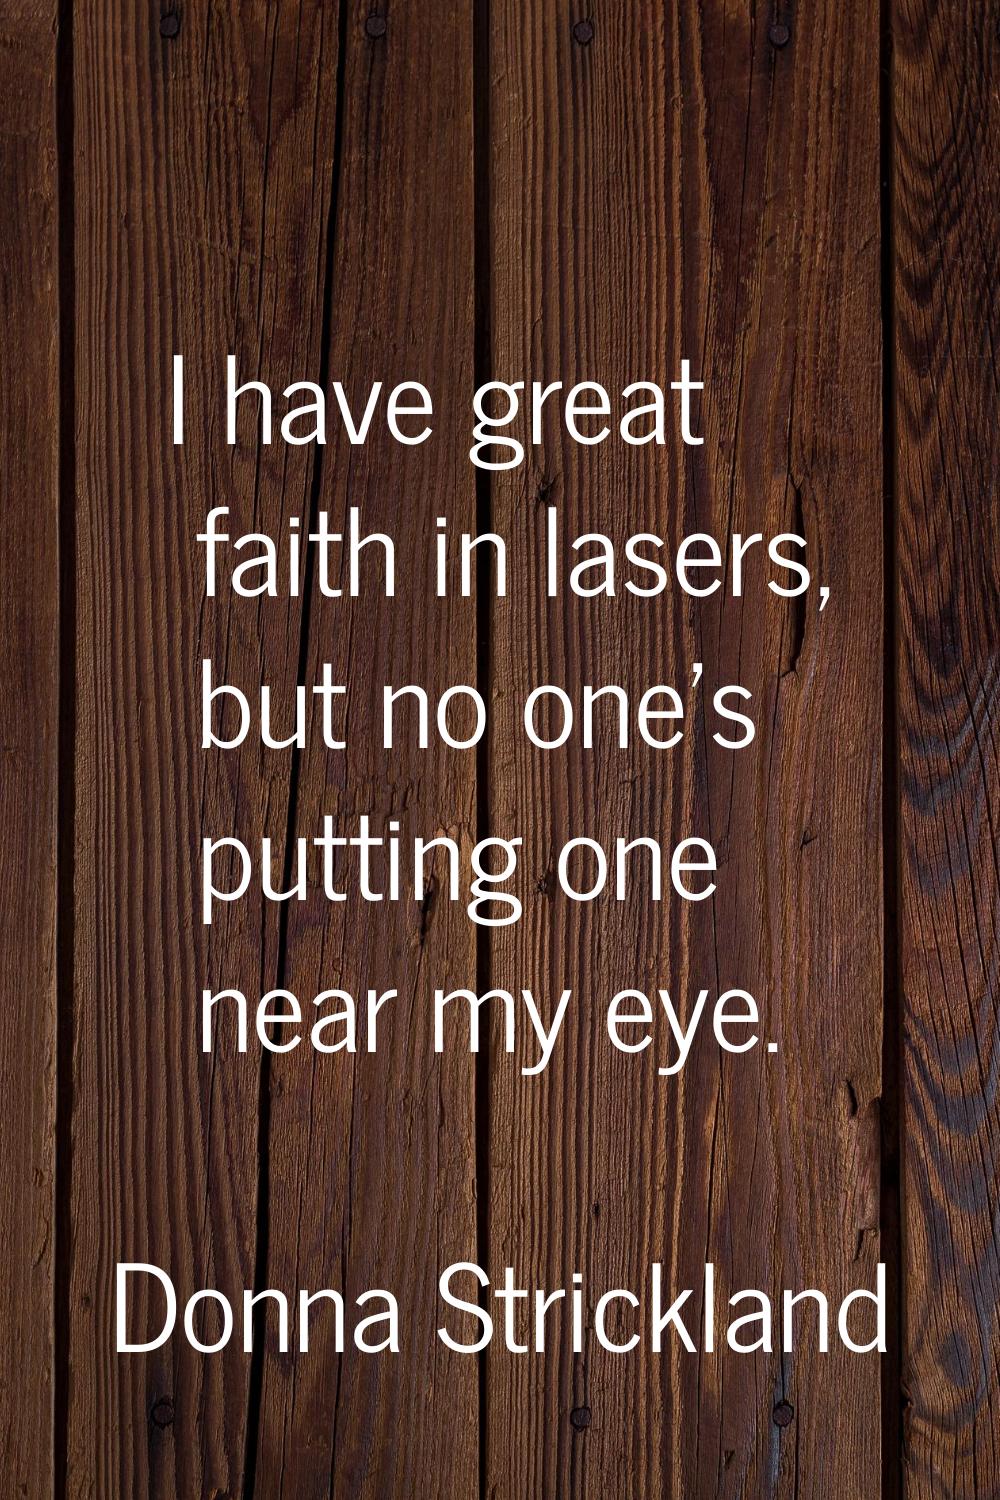 I have great faith in lasers, but no one’s putting one near my eye.